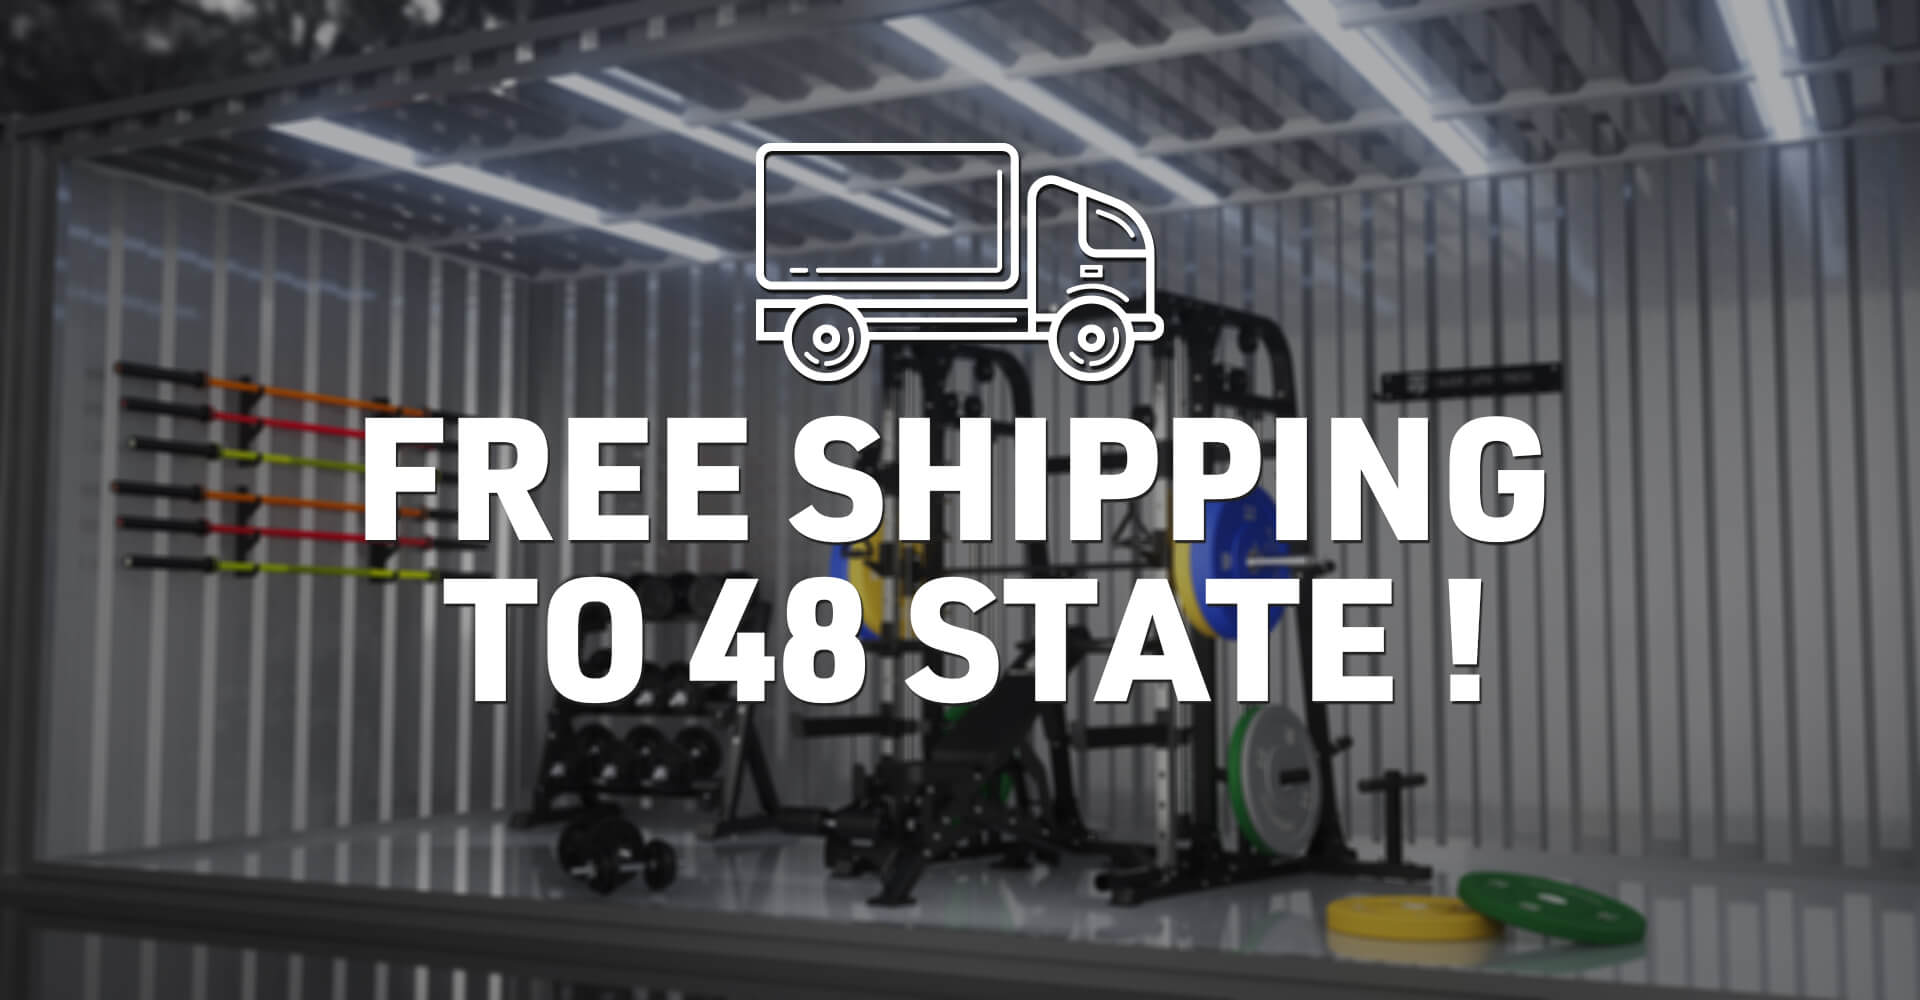 Although our products have a gross weight of up to 396kg, we still offer free shipping on all 48 states because of our superior quality, which is why we are able to provide this excellent service.